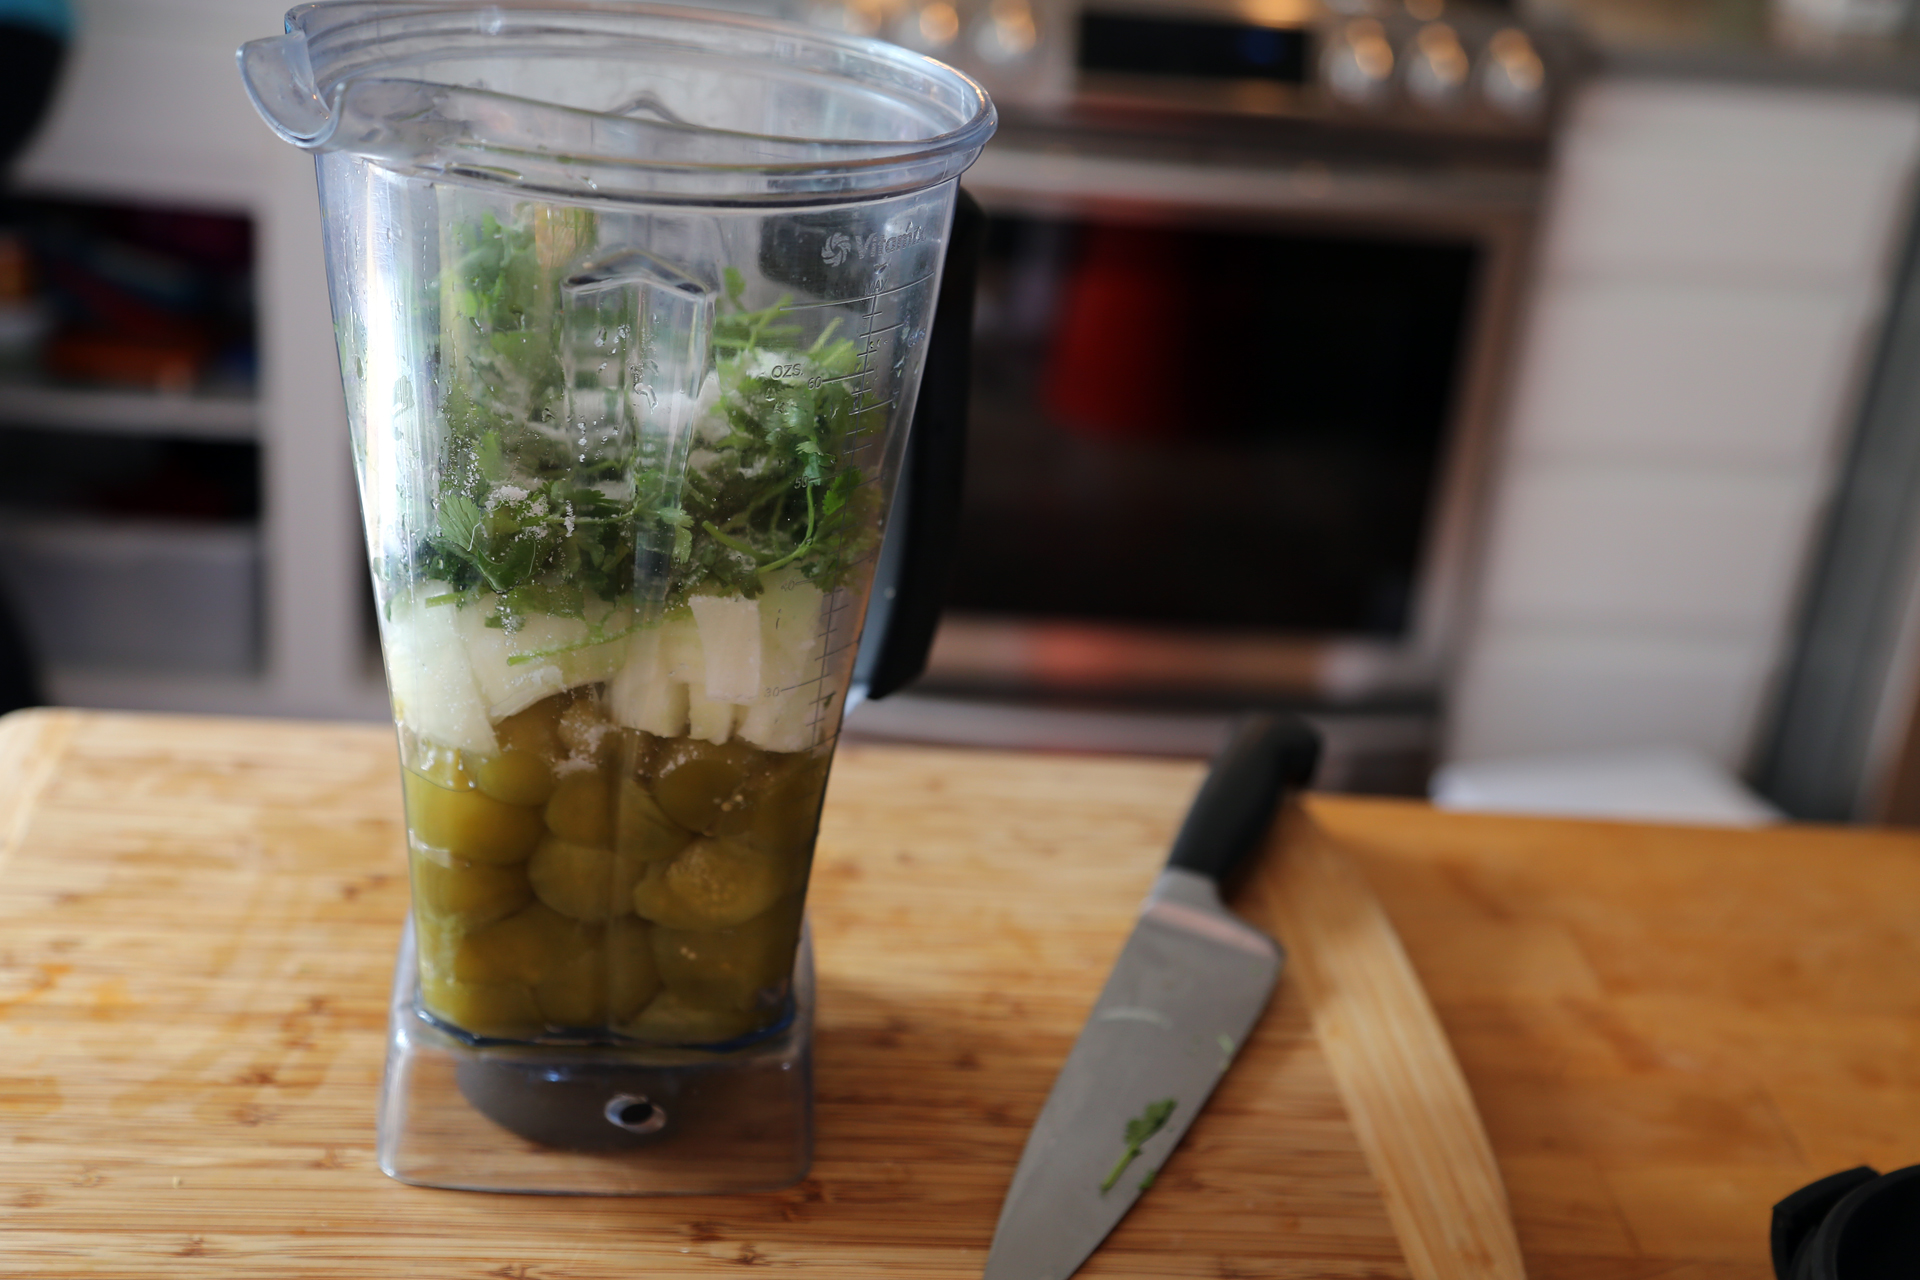 To make the sauce, add the tomatillos, garlic, chiles if using, cilantro, onion, and 1 tsp salt, to a blender.